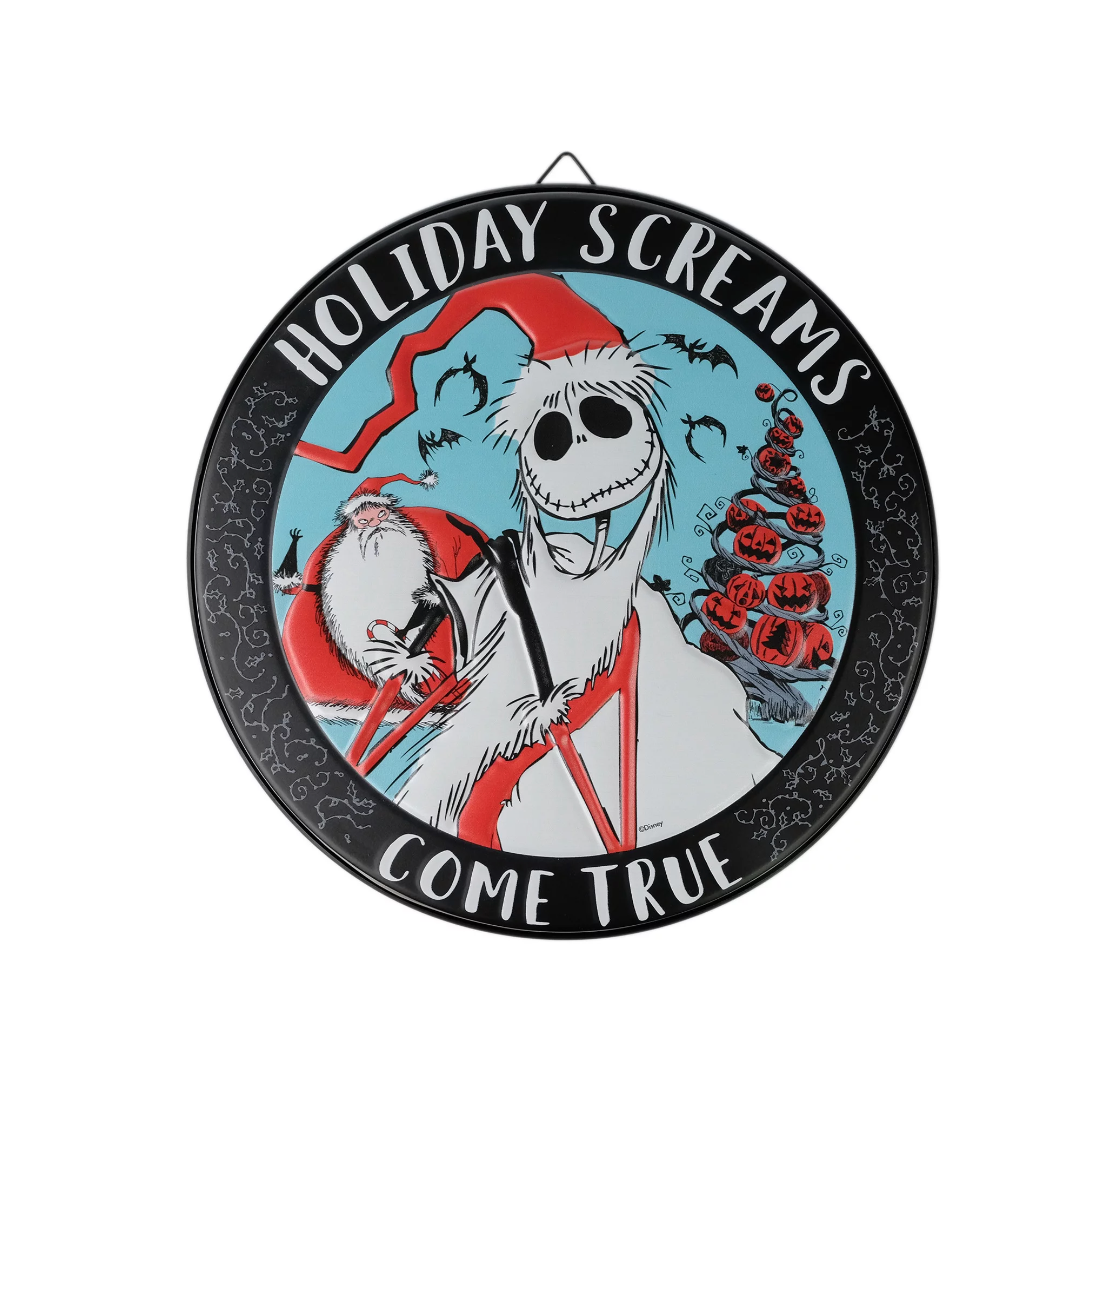 Disney The Nightmare Before Christmas Jack Holiday Screams Come True Metal Sign